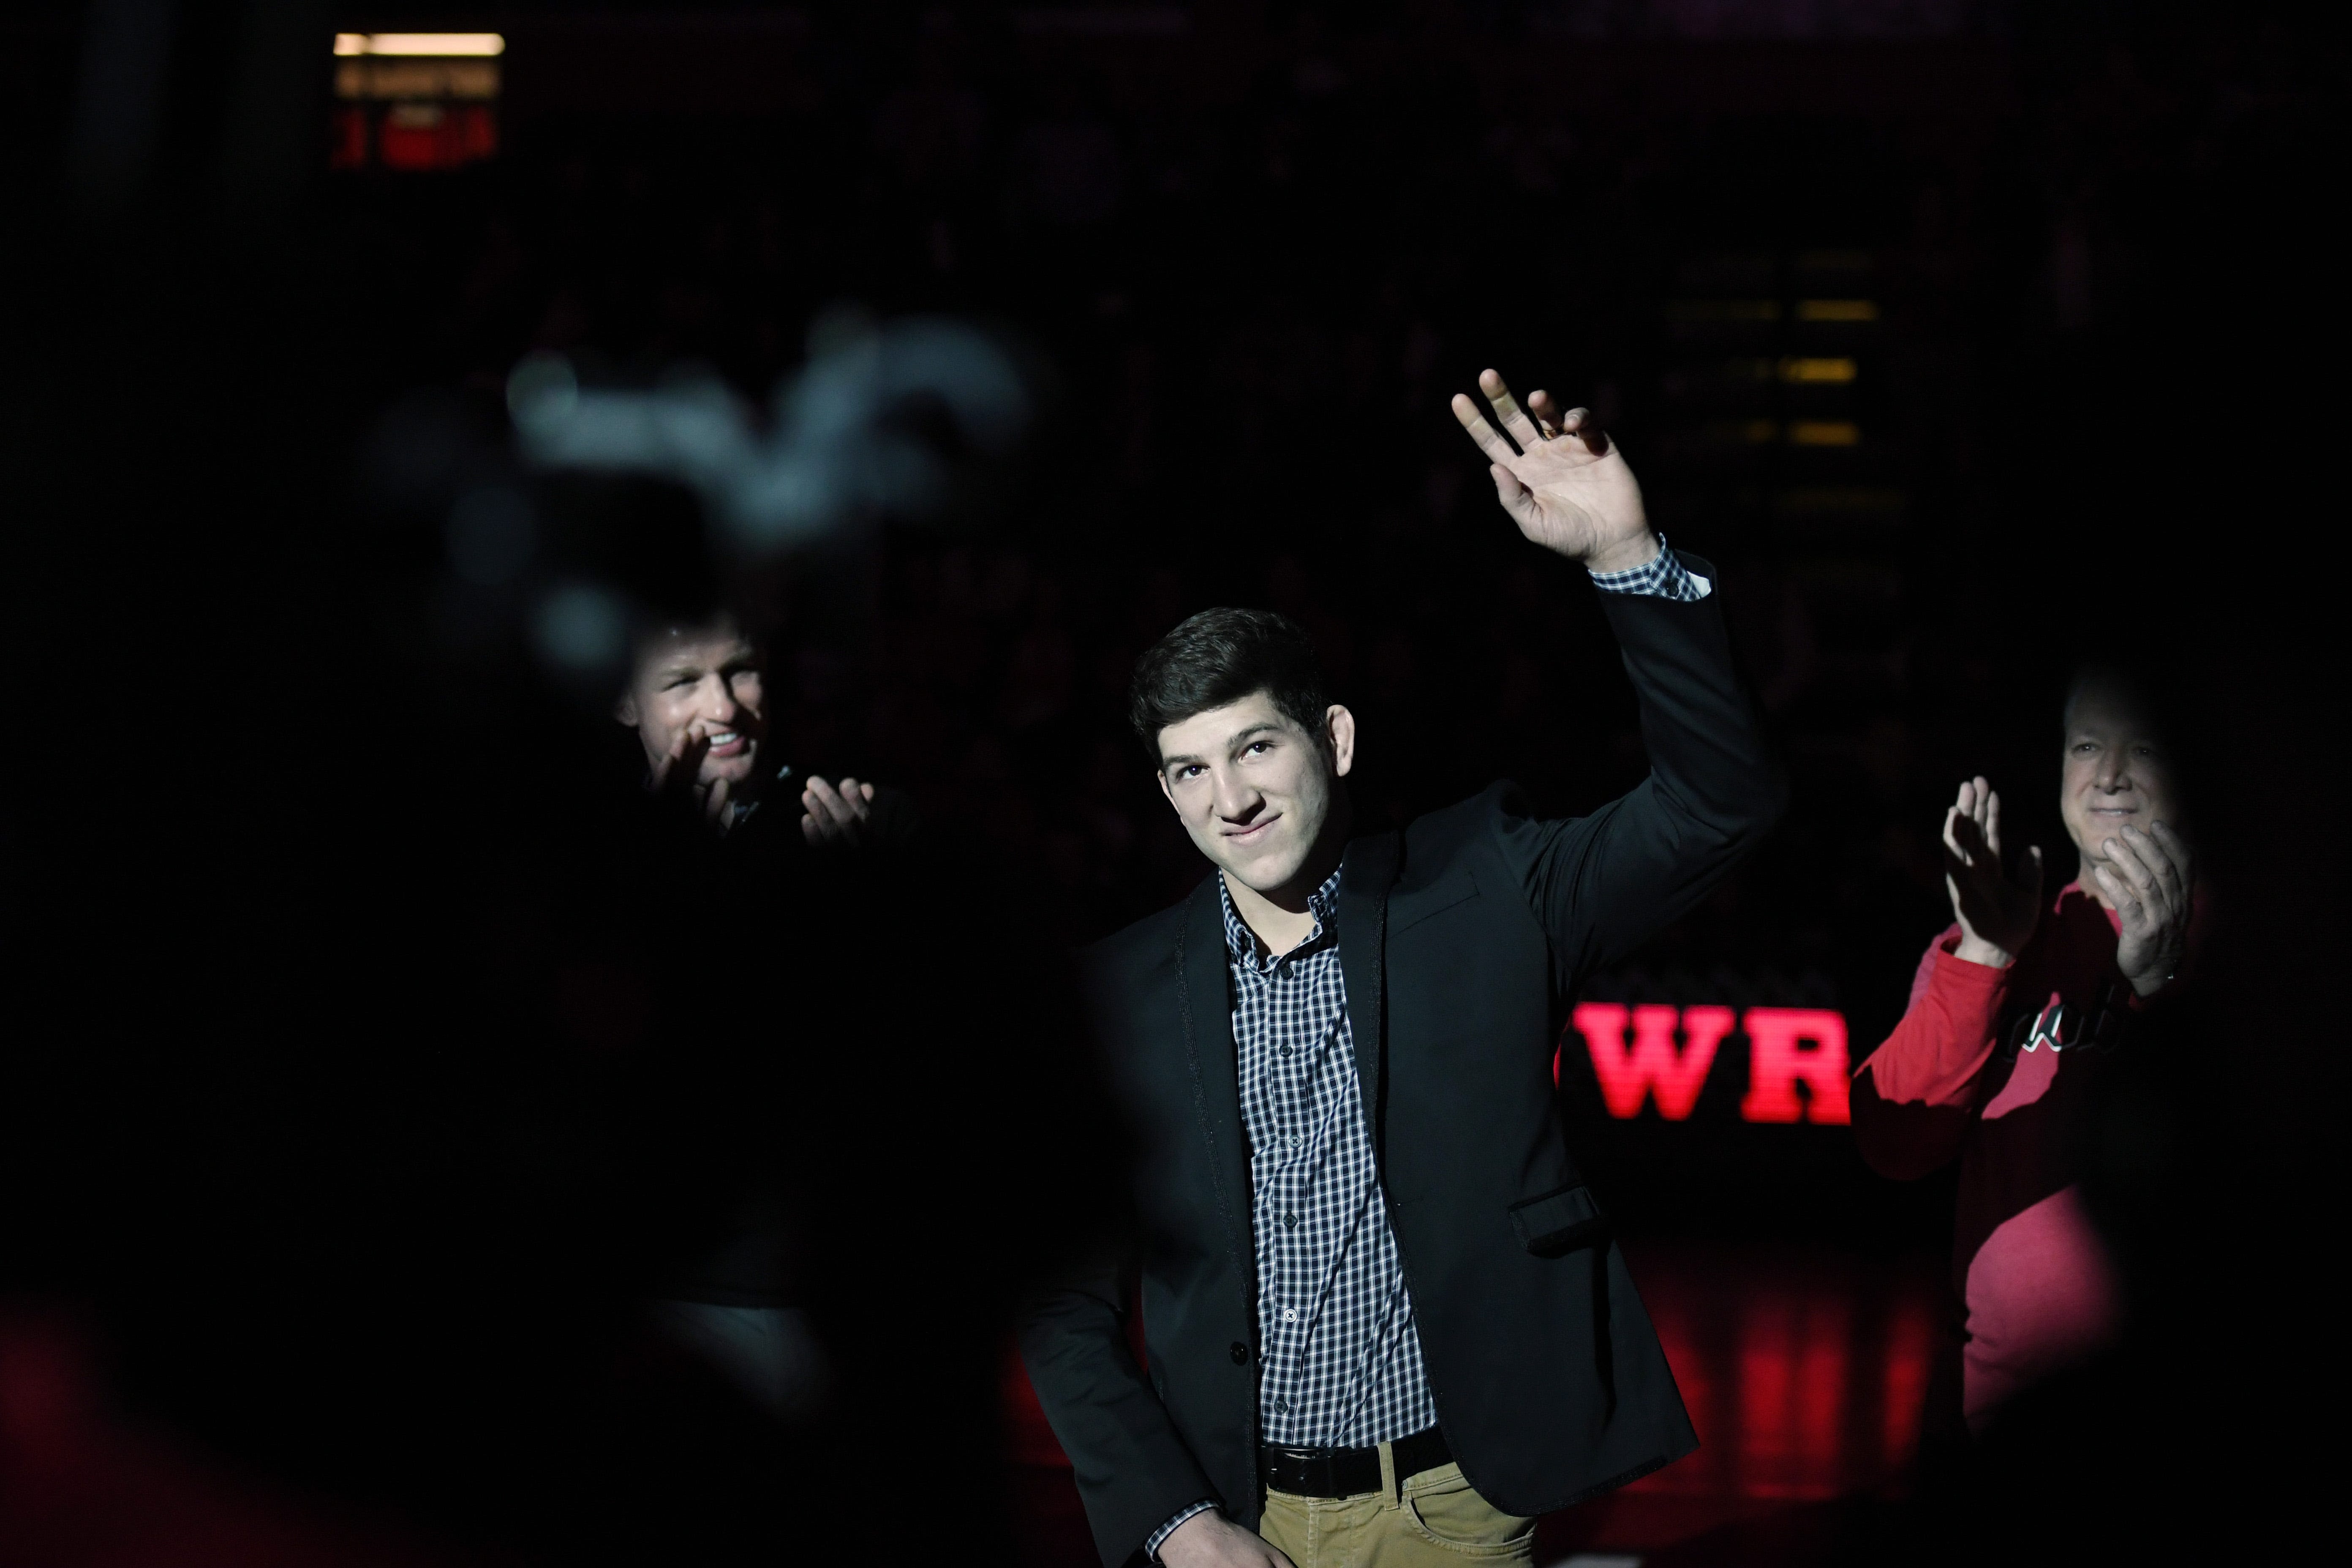 Anthony Ashnault hired as an assistant wrestling coach at Princeton